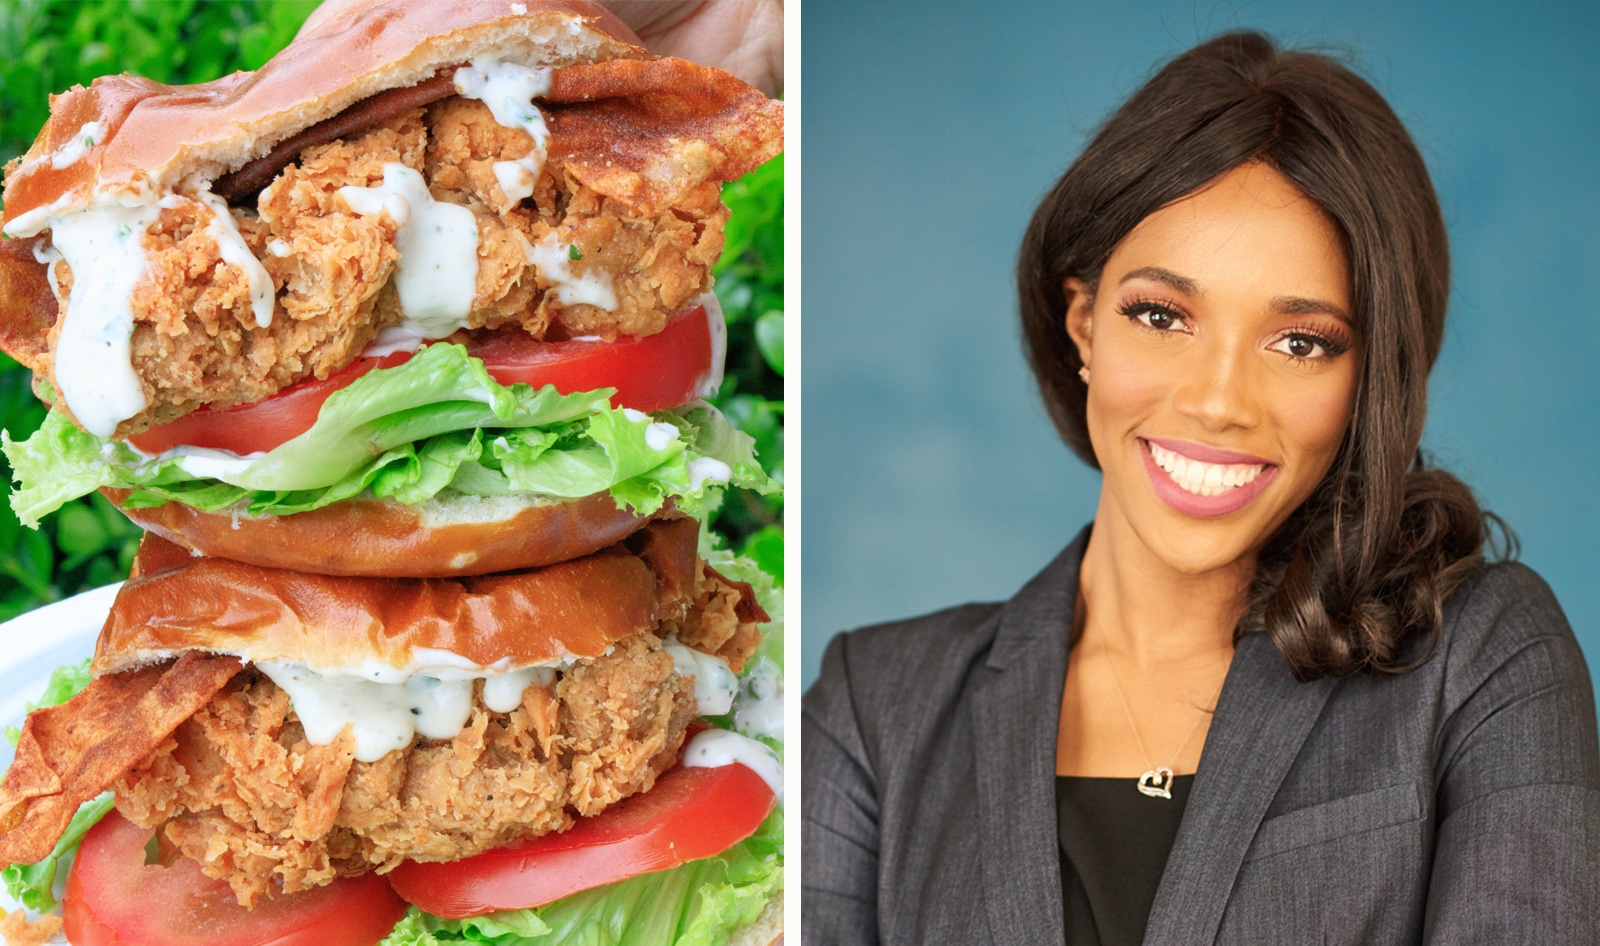 This Woman Turned Down $1 Million on 'Shark Tank'; She’s Now Selling 1 Million Pounds of Vegan Fried Chicken